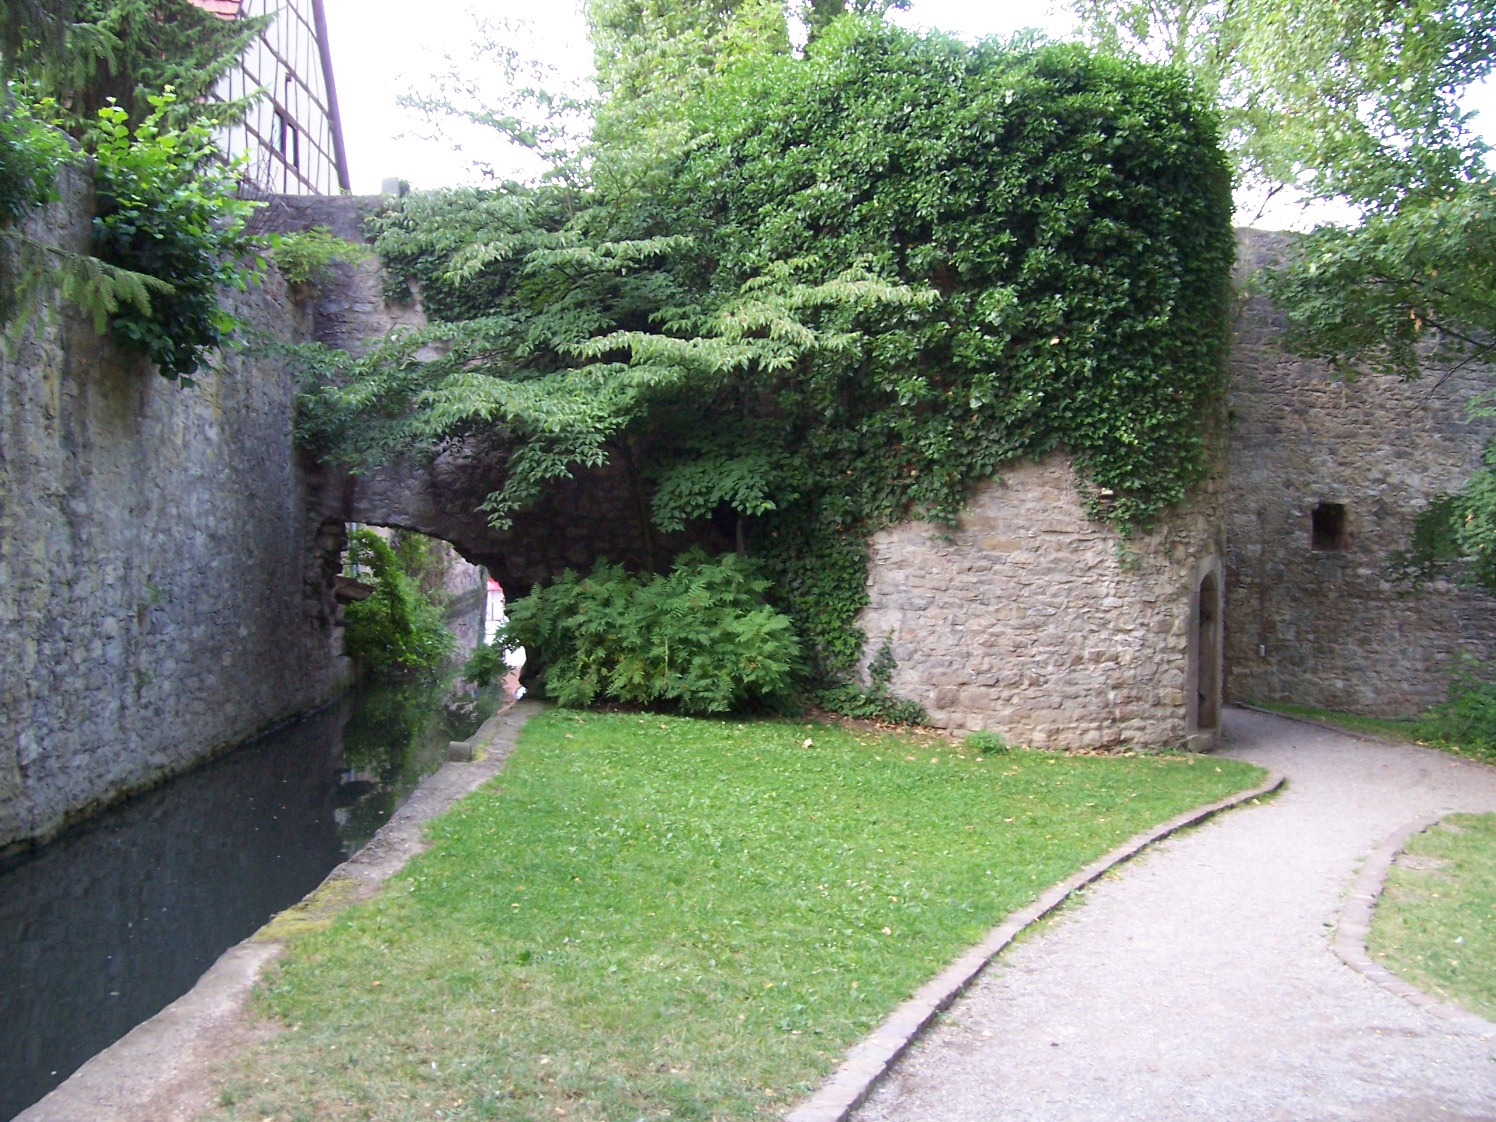 Remains of the town-wall with Hungerturm (tower) at the Mühlkanal (channel) in Tauberbischofsheim